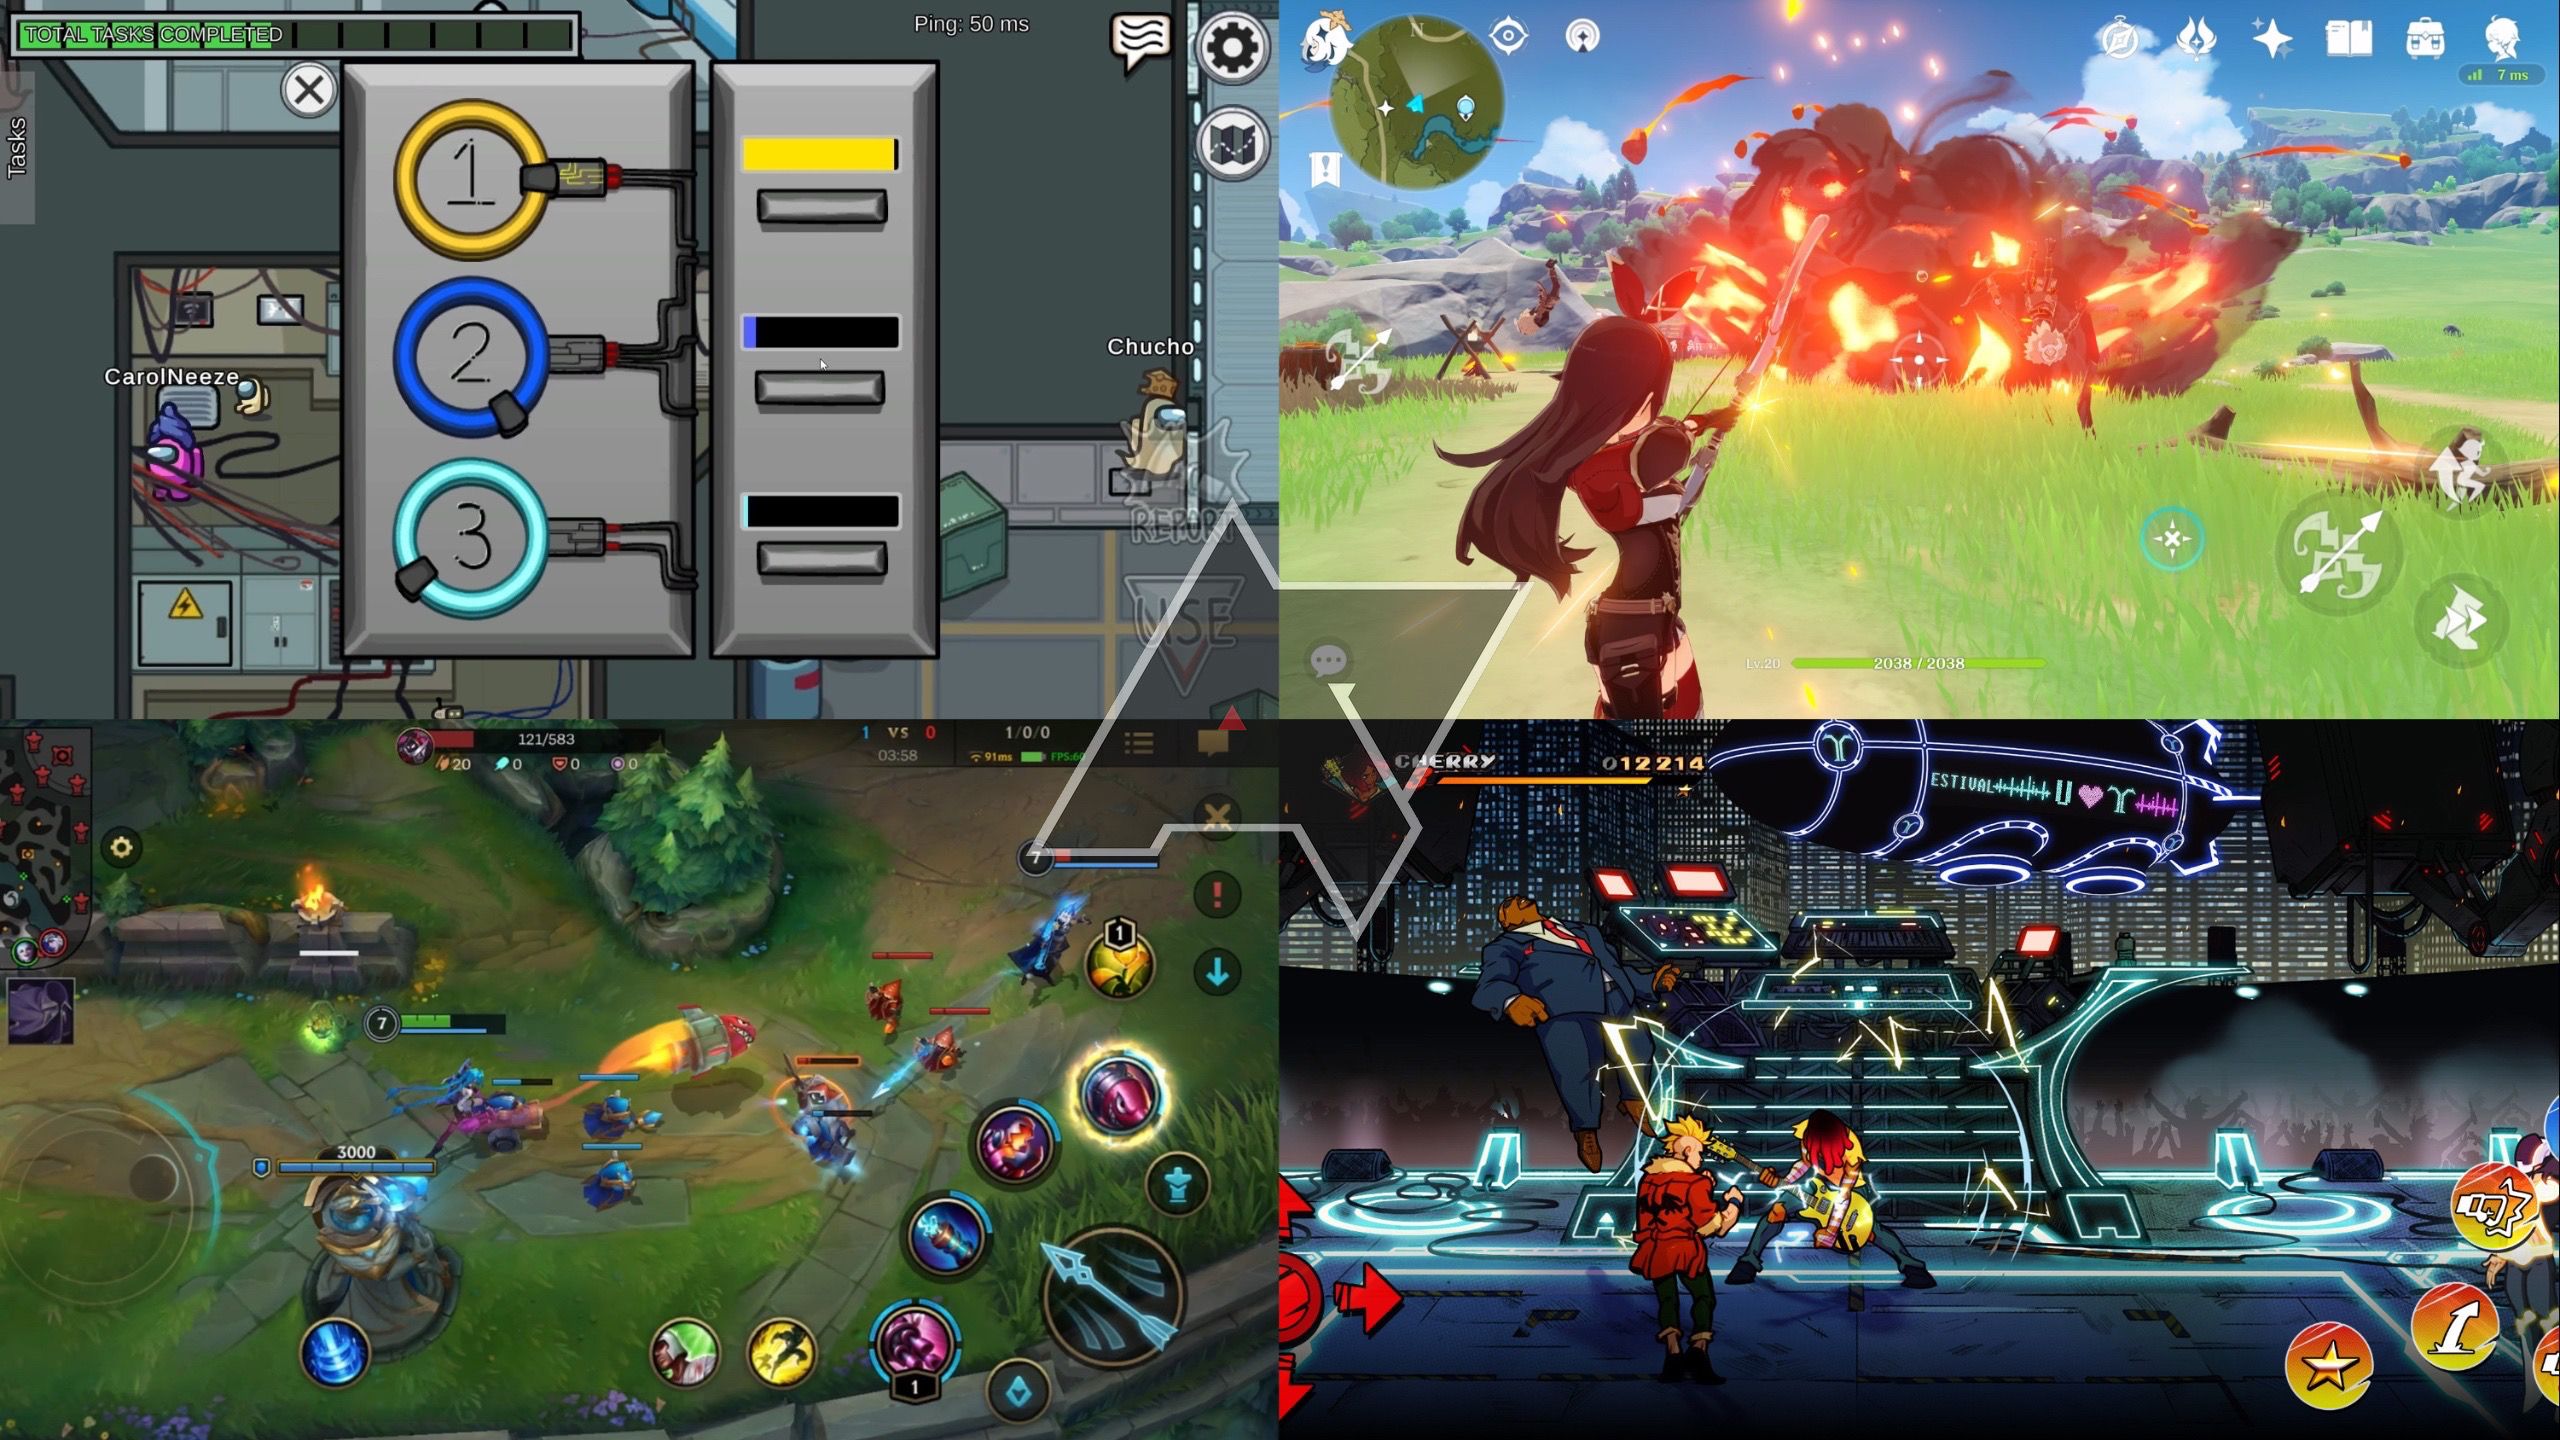 Free mobile video games on Android, iOS make for travel fun